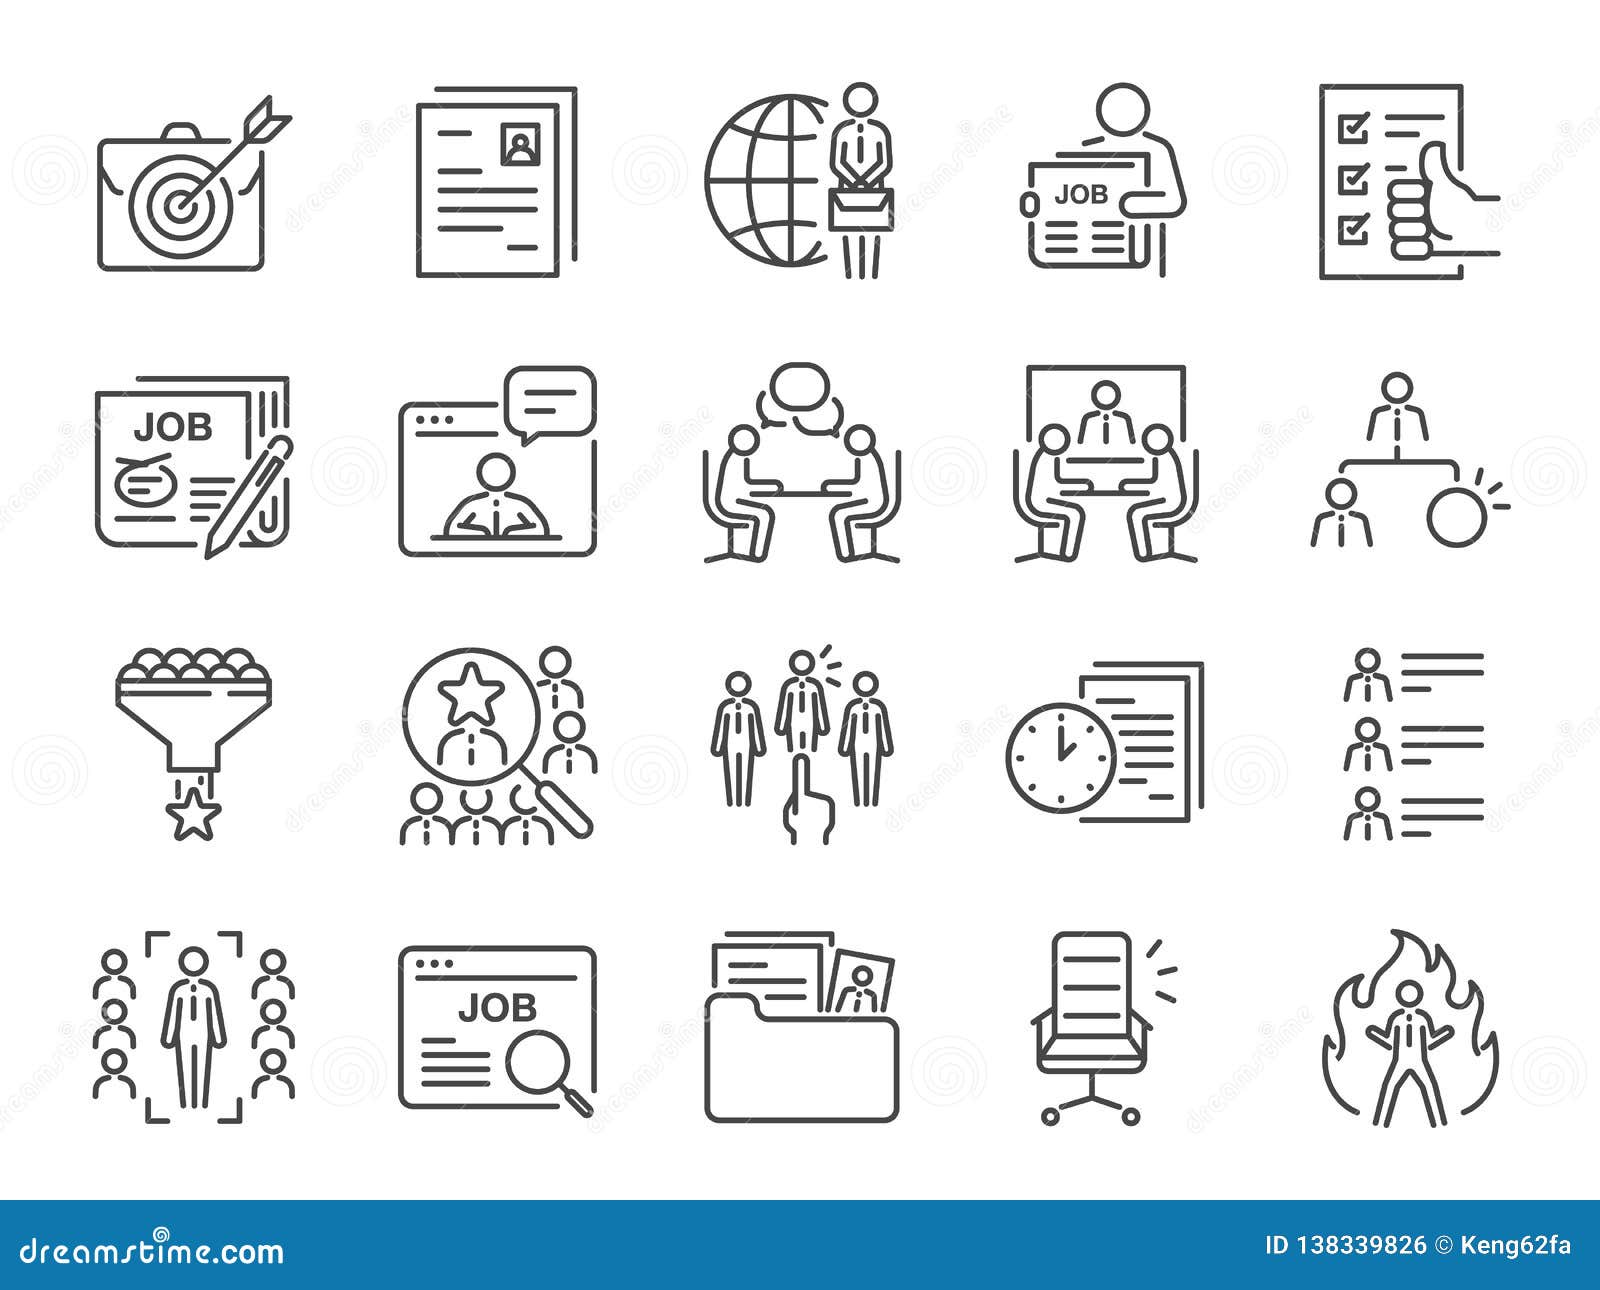 jobs line icon set. included icons as career, seeking job, employment, recruit, recruitment and more.